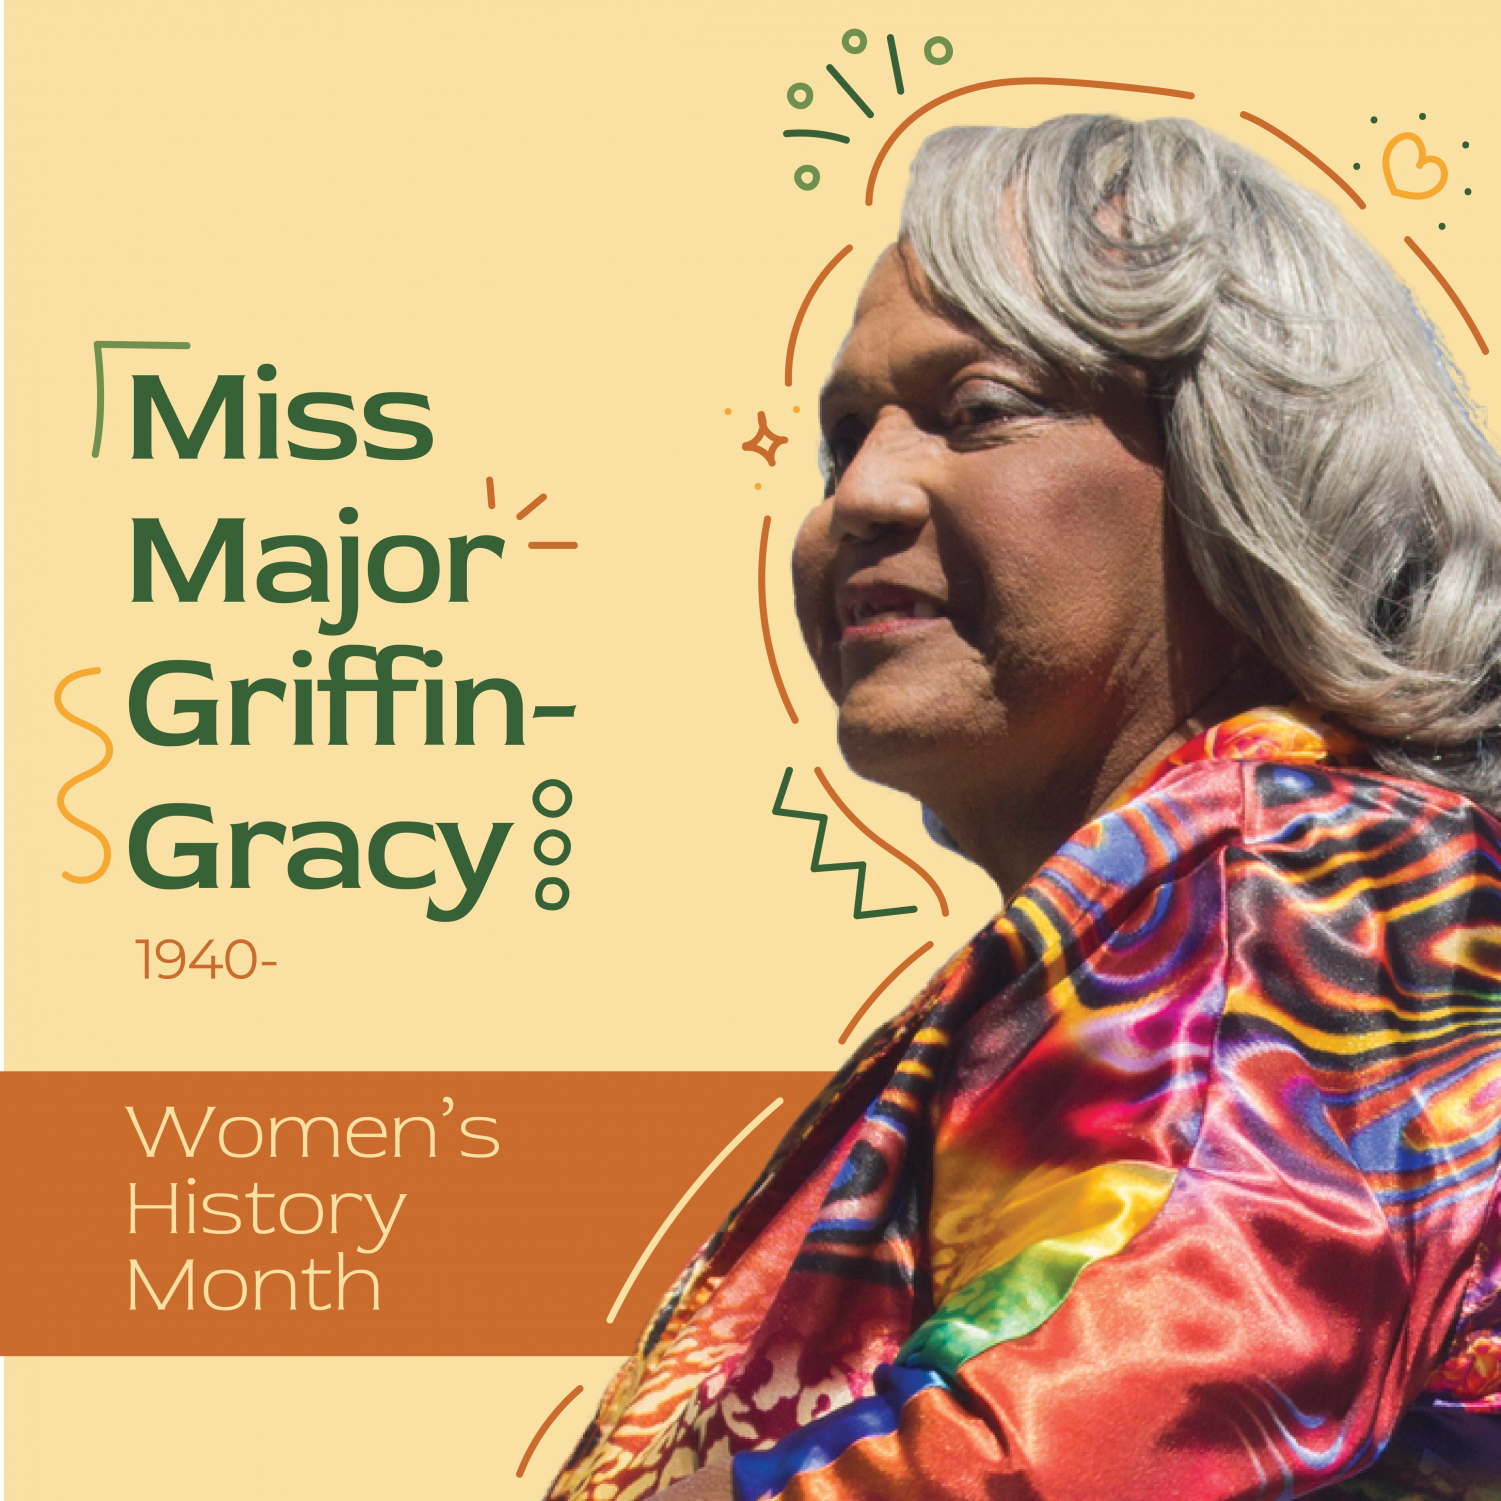 Womens+History+Month%3A+Miss+Major+Griffin-Gracy